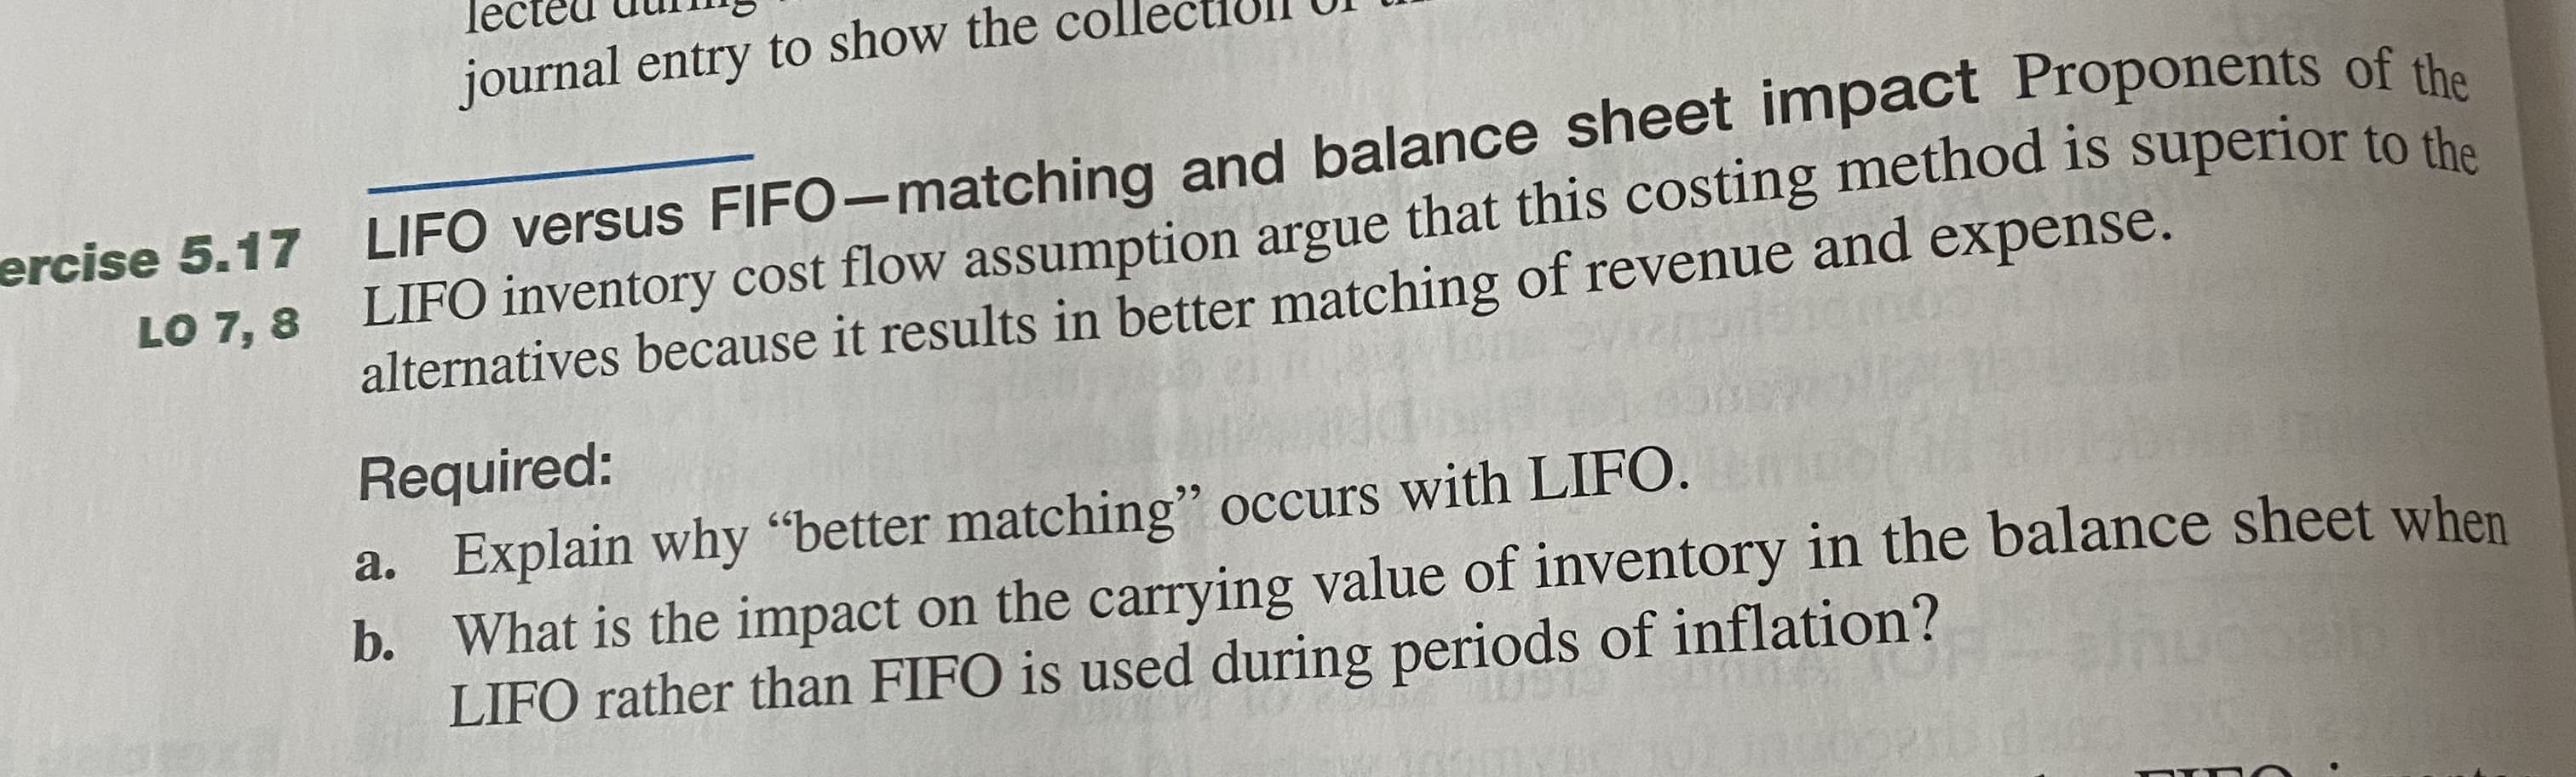 Required:
a. Explain why "better matching" occurs with LIFO.
b. What is the impact on the carrying value of inventory in the balance sheet when
LIFO rather than FIFO is used during periods of inflation?
